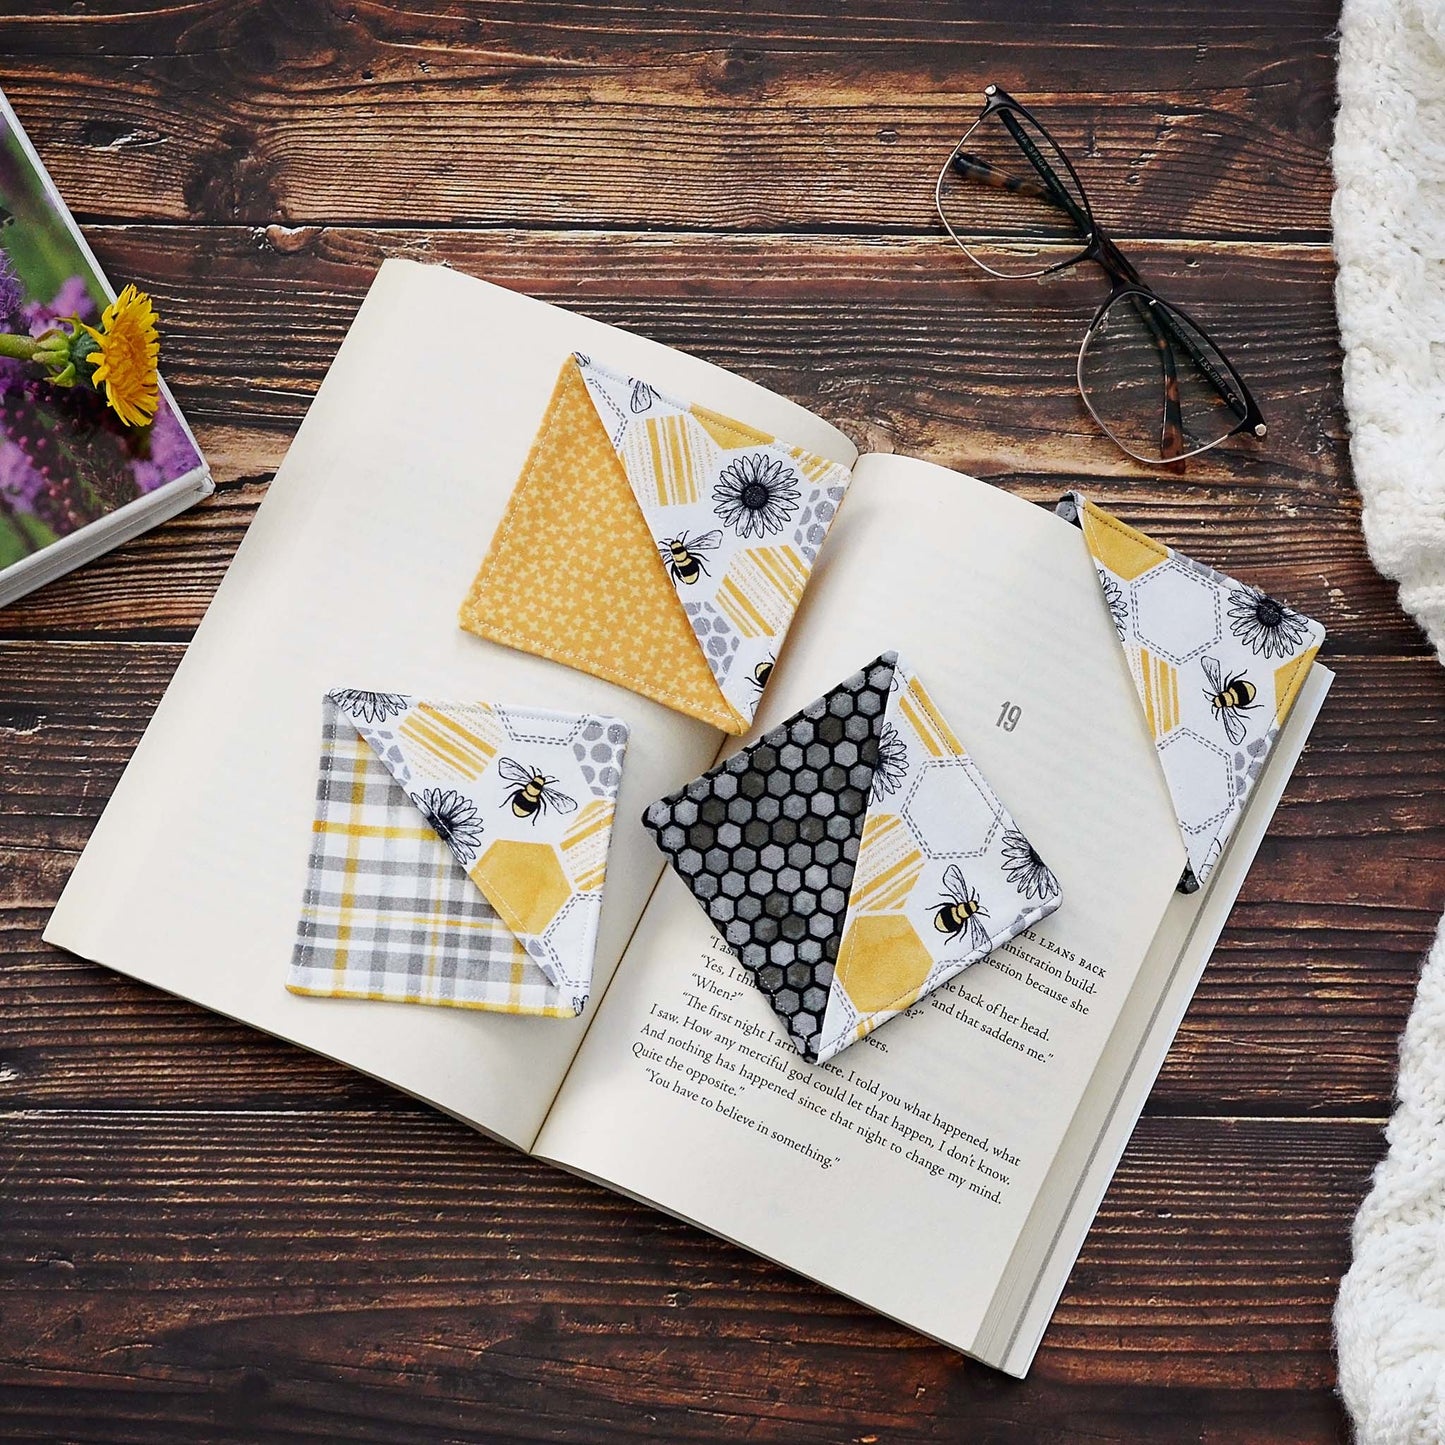 Fun bee corner bookmarks in three fabric choices, yellow, charcoal and plaid.  Made in Canada by Yellow Petal Handmade.